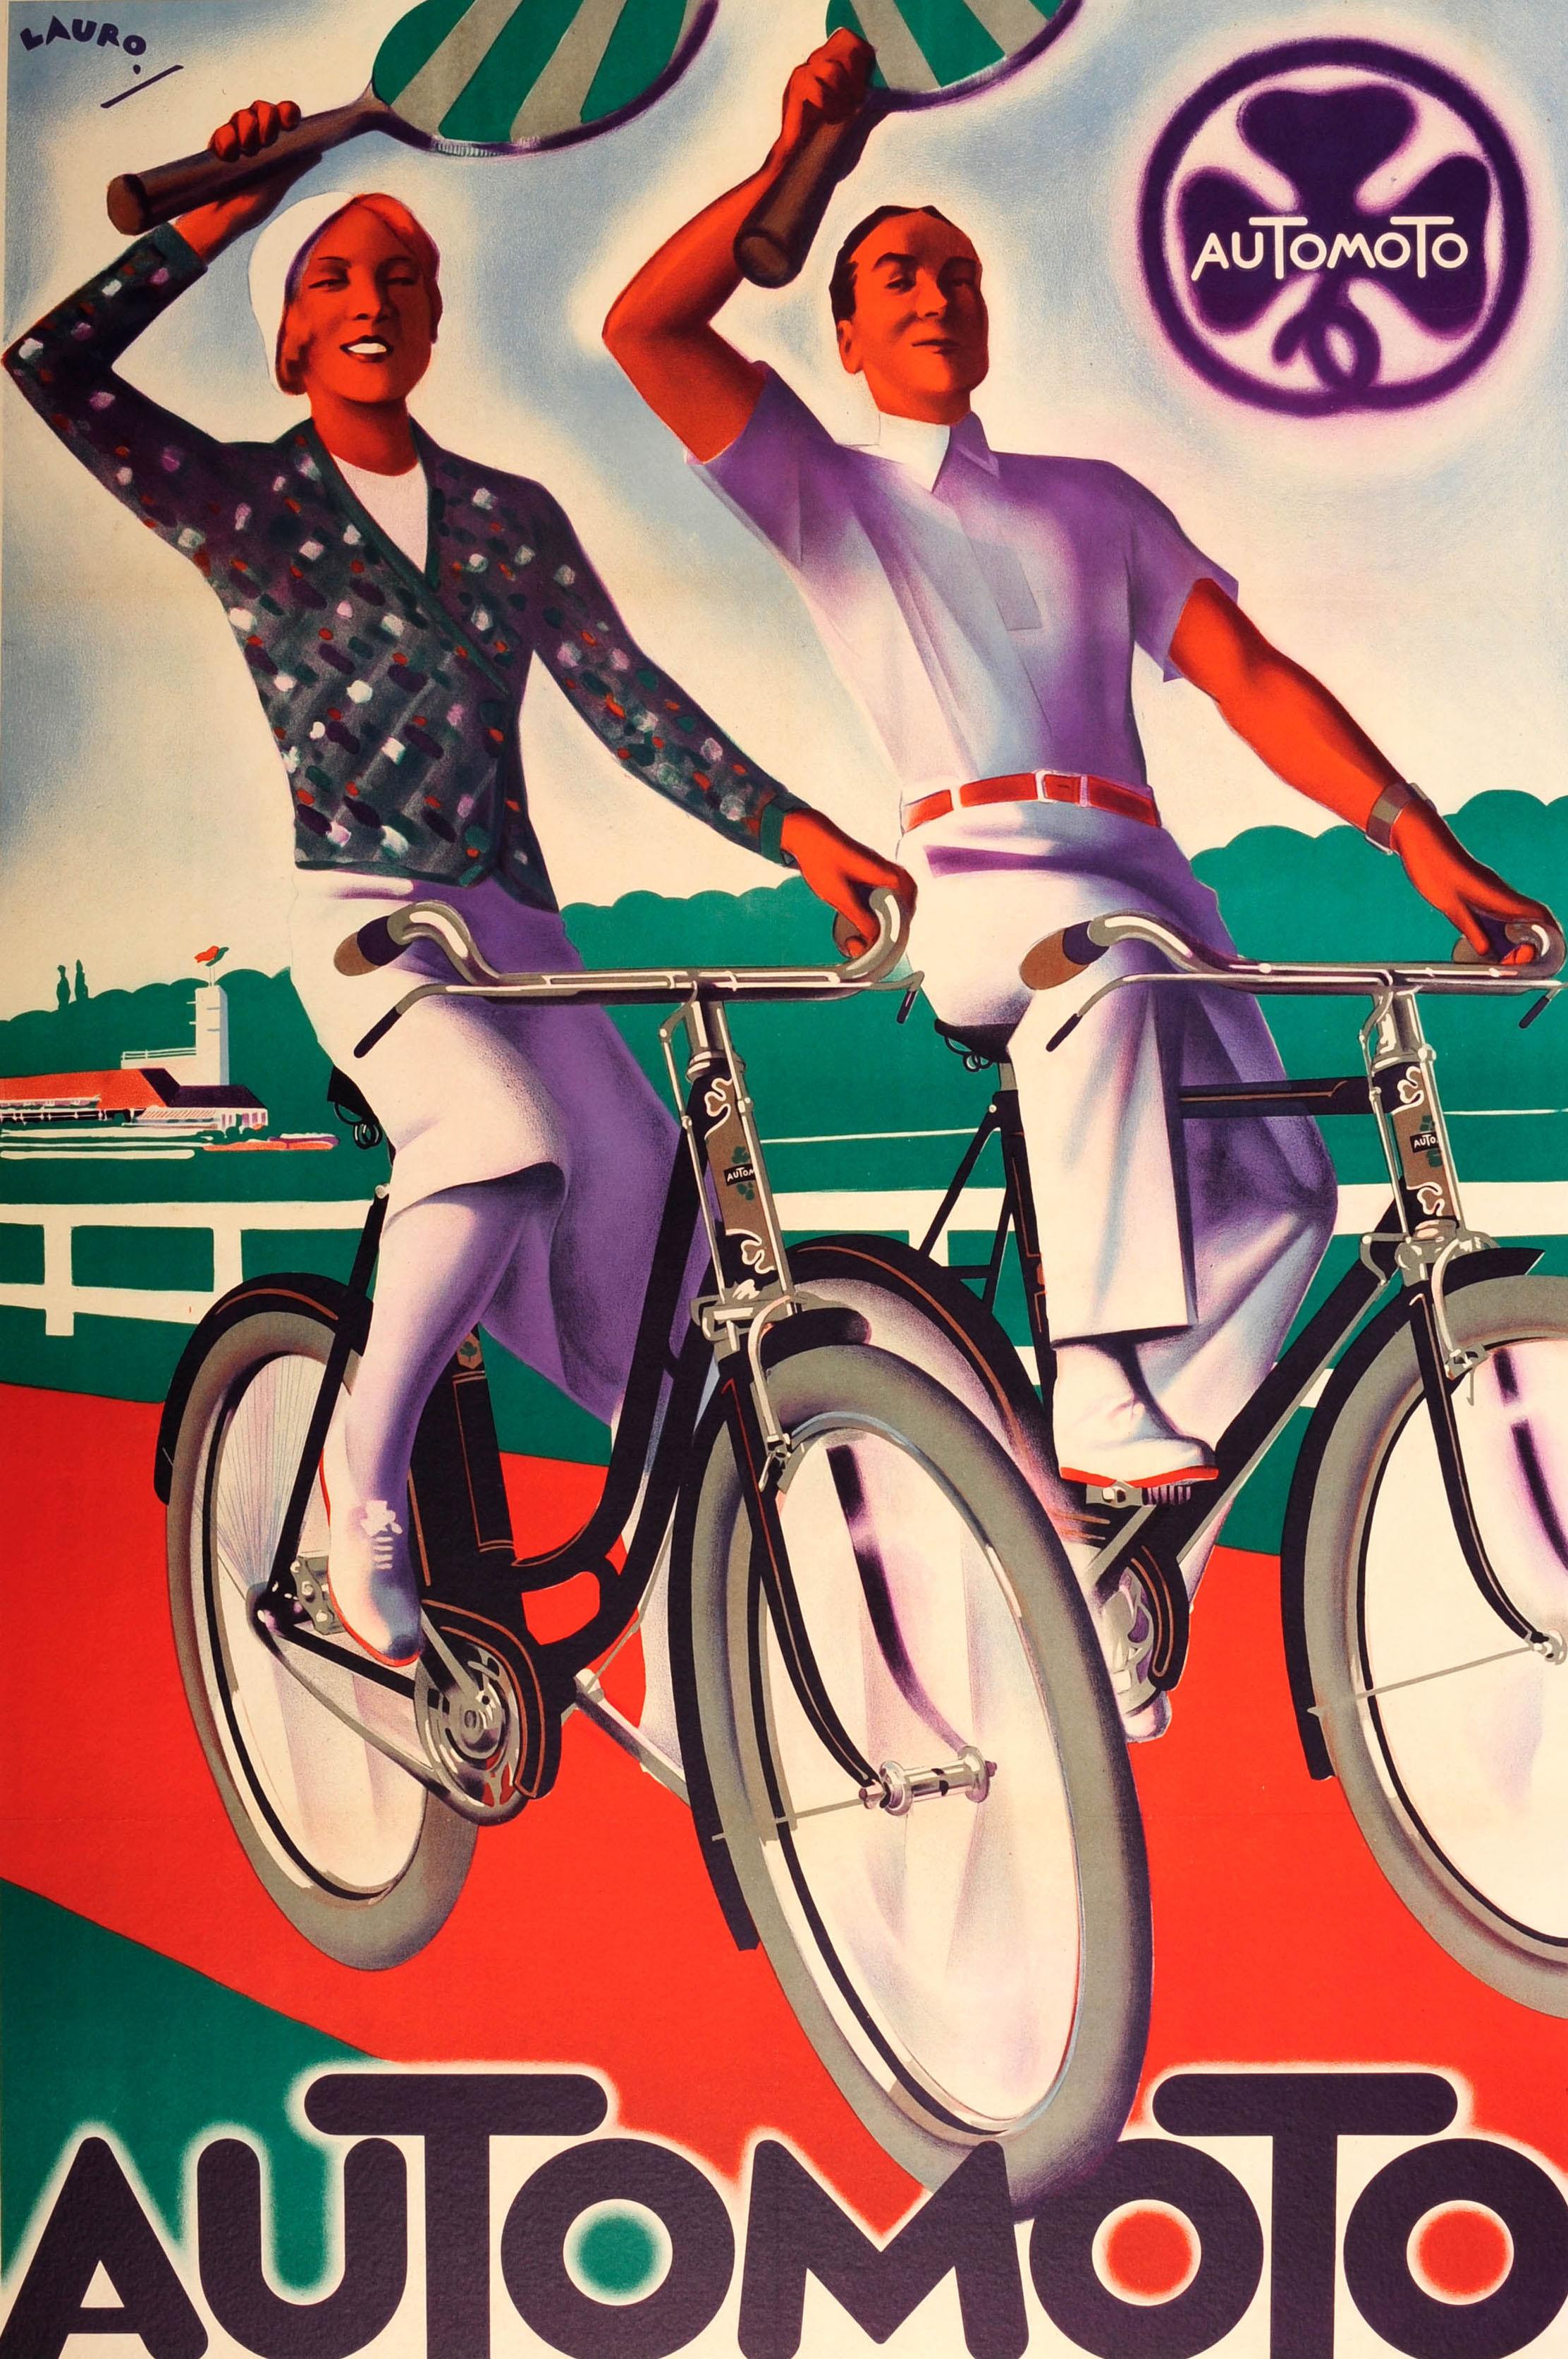 Original vintage adverting poster for the French manufacturer of bicycles automoto featuring a stunning Art Deco style artwork by Maurice Lauro (b 1898) of an elegant smiling young couple wearing tennis whites and riding their automoto bikes in the